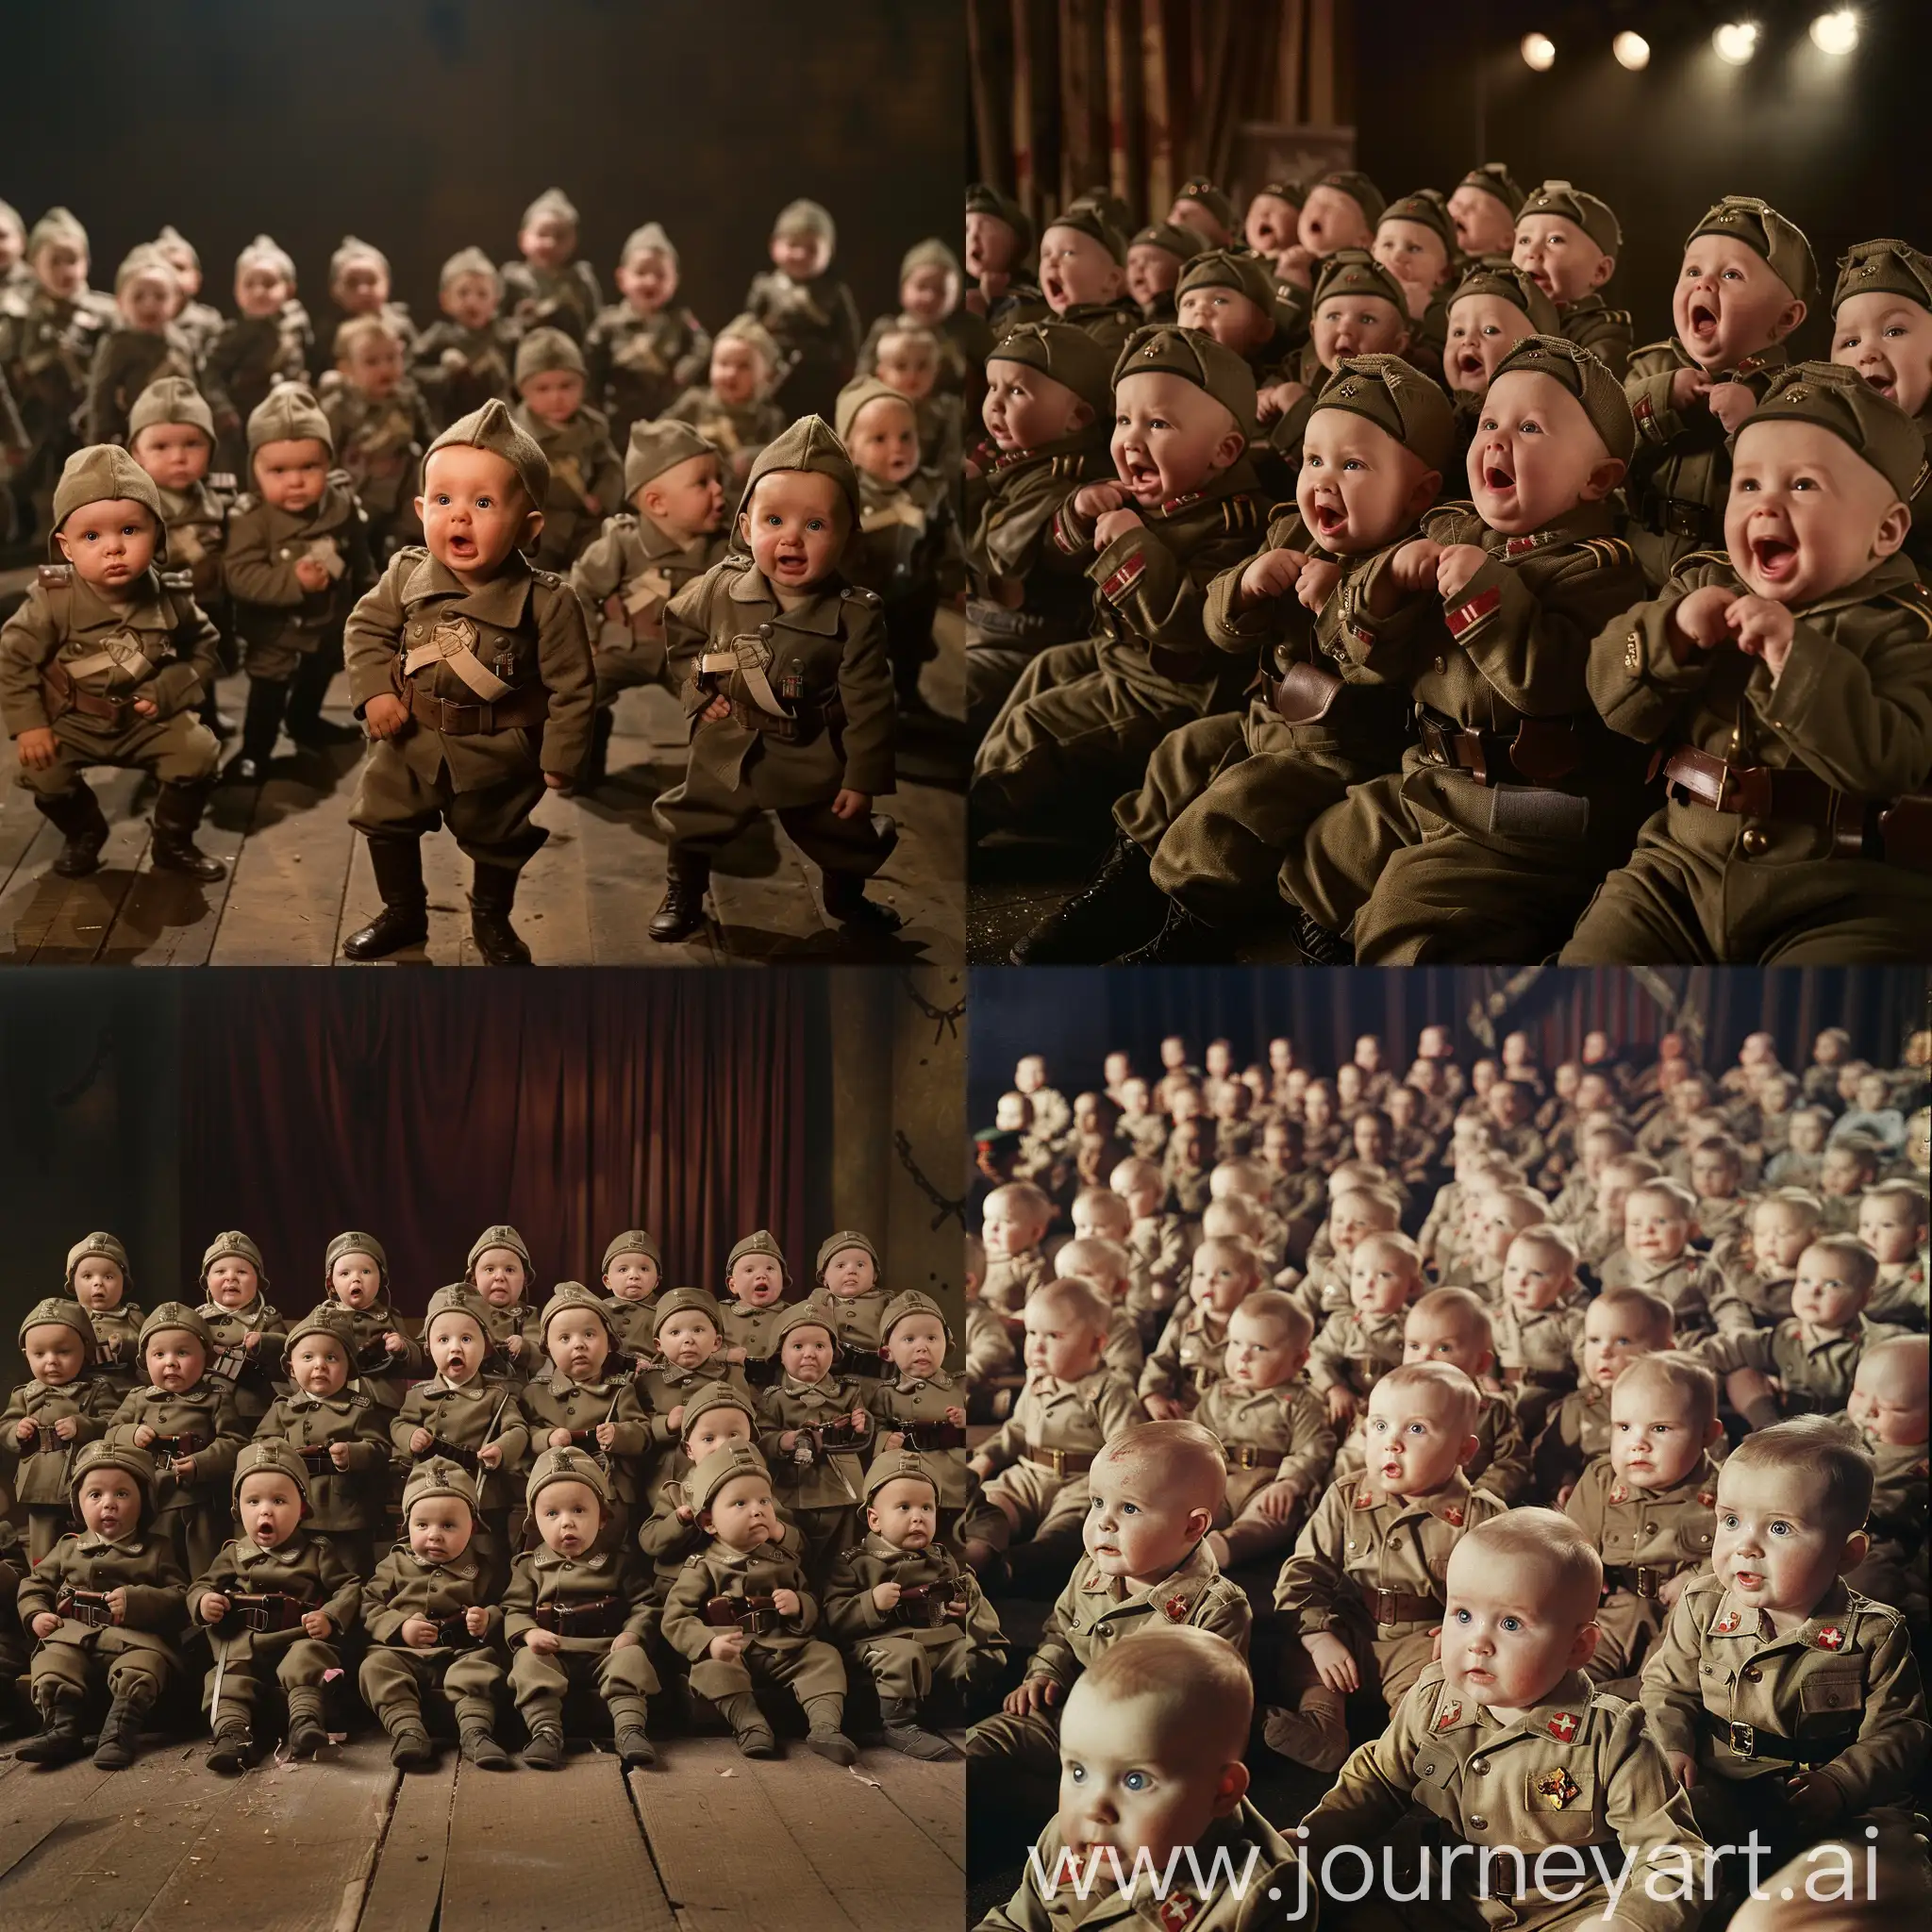 Babies-in-Military-Uniforms-World-War-II-Stage-Scene-with-Cinematographic-Lighting